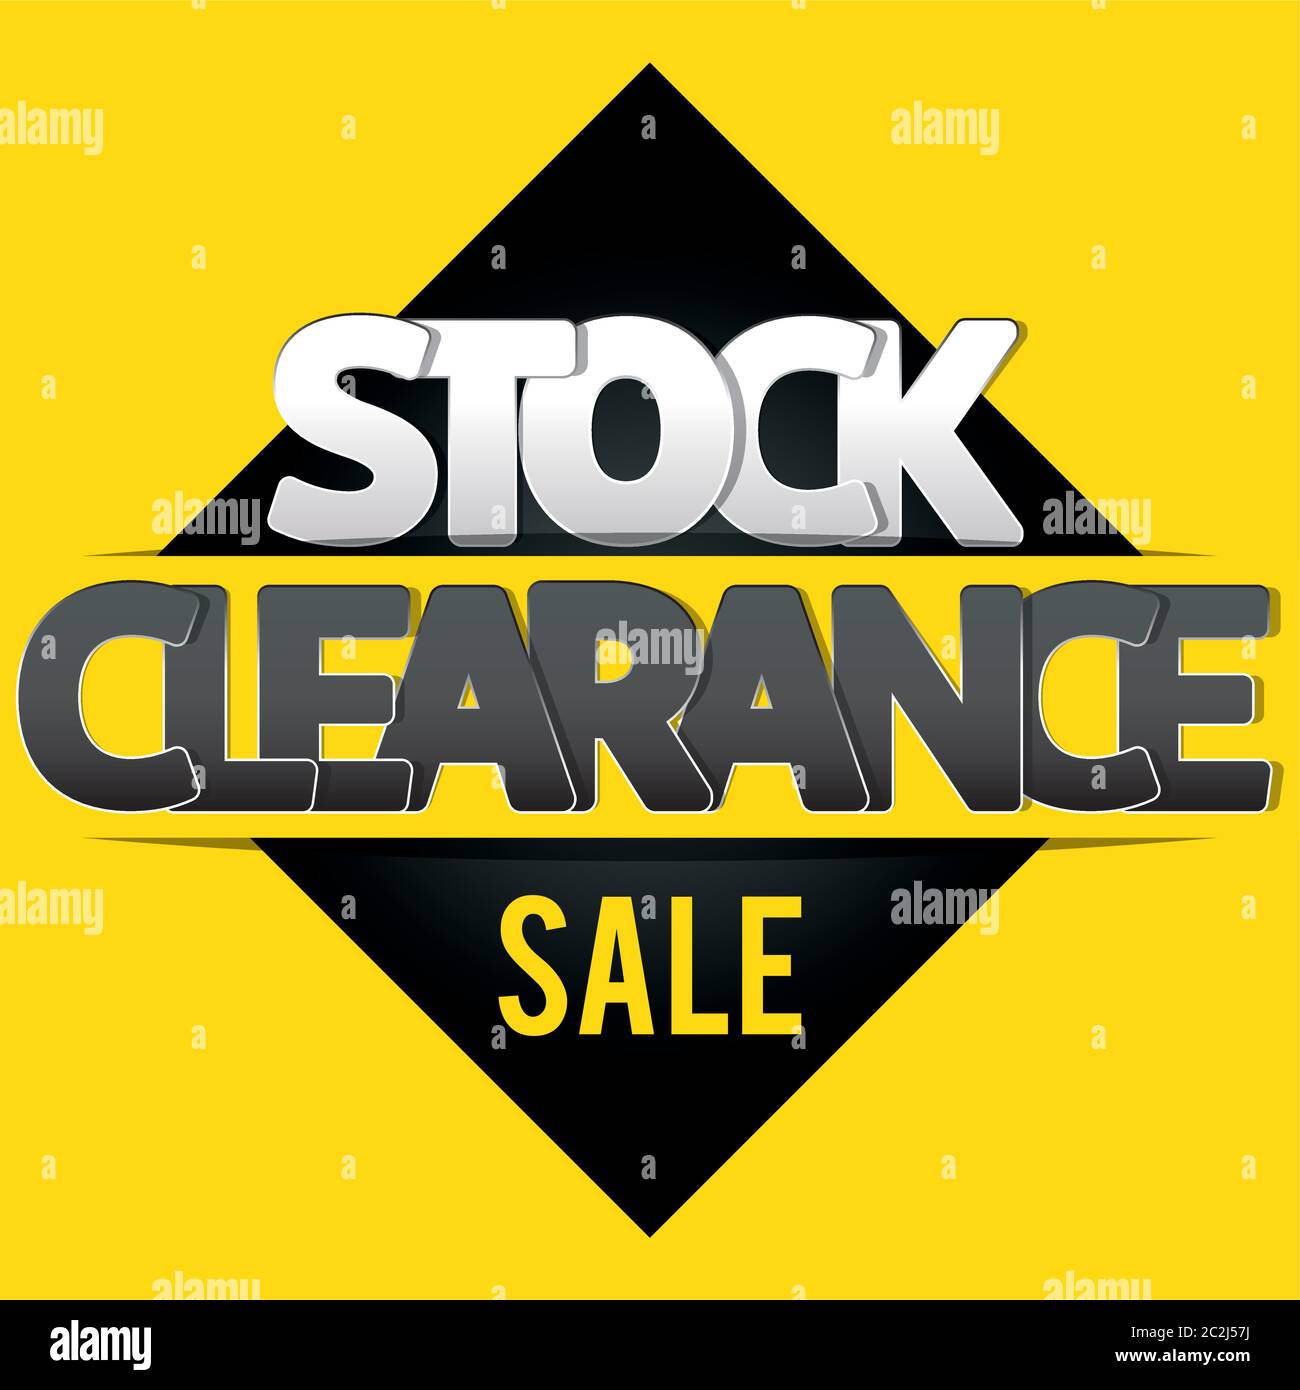 Clothing store clearance discount sale Stock Vector Images - Page 3 - Alamy